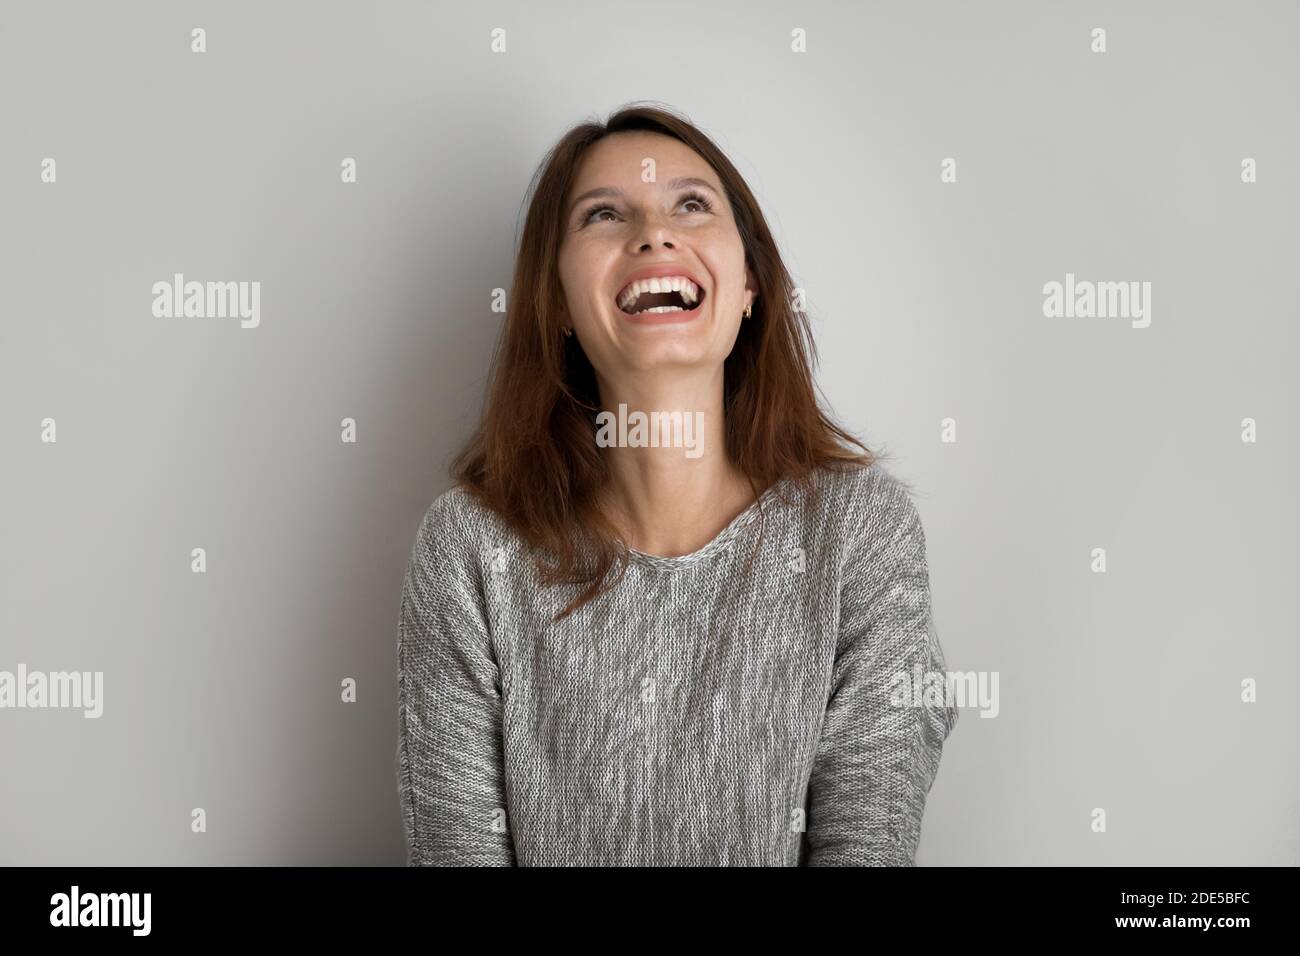 Emotional happy young woman looking up in distance. Stock Photo